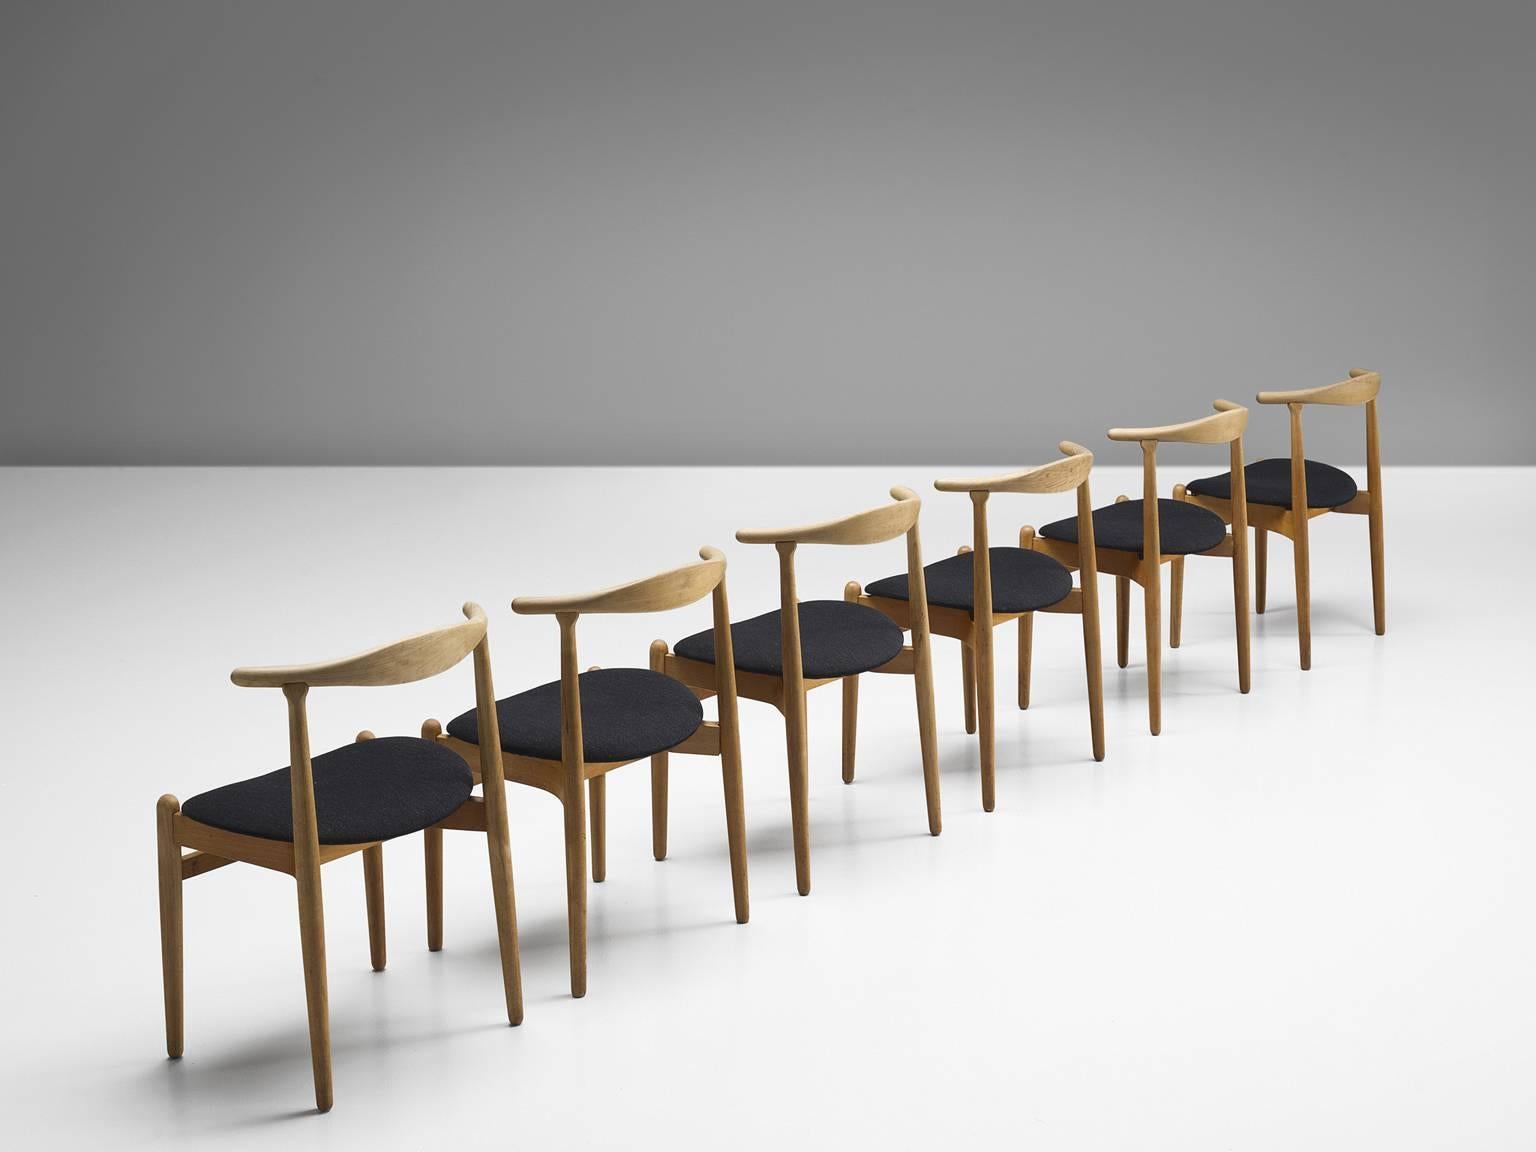 Dining chairs, oak and fabric, Denmark, 1960s.

These small elegant dining chairs feature a solid wooden curved backrest. There are four straight legs and the two front legs are connected via a horizontal slat. The legs slightly protrude above the